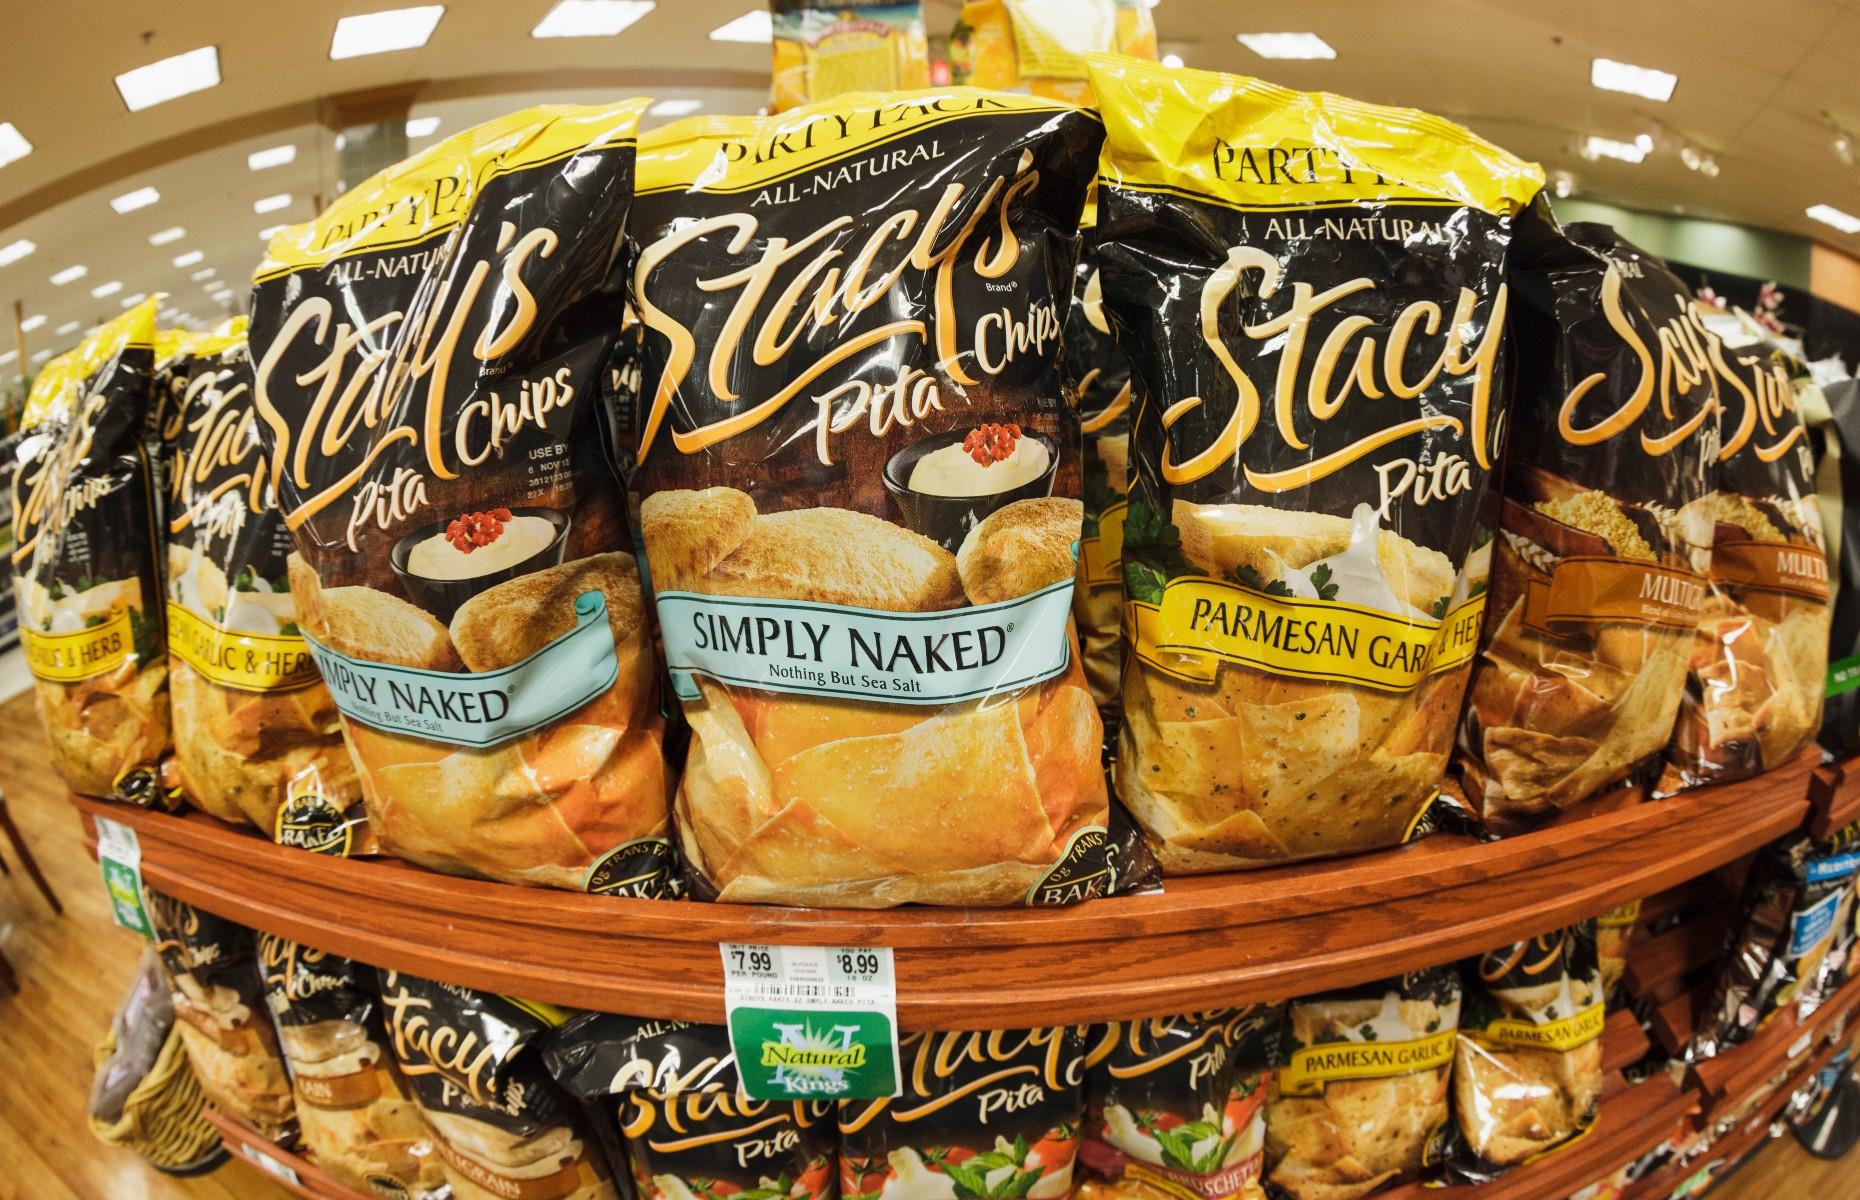 Stacy’s Pita Chips: owned by PepsiCo